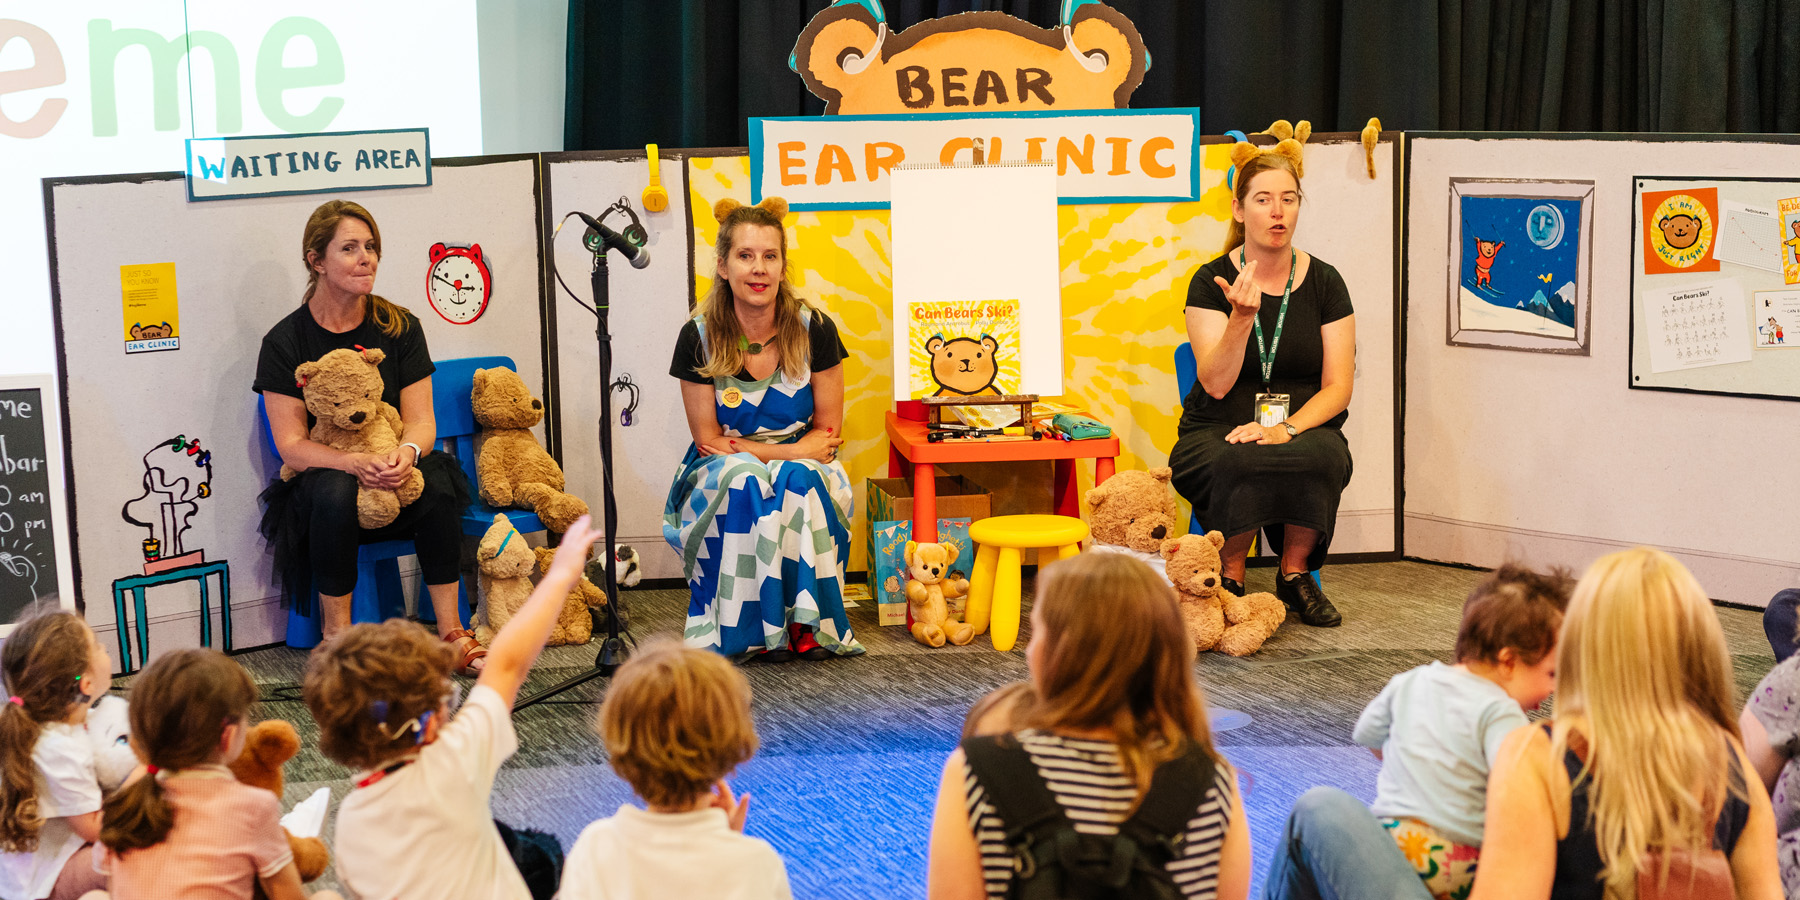 Two women on stage at the Bear Ear Clinic